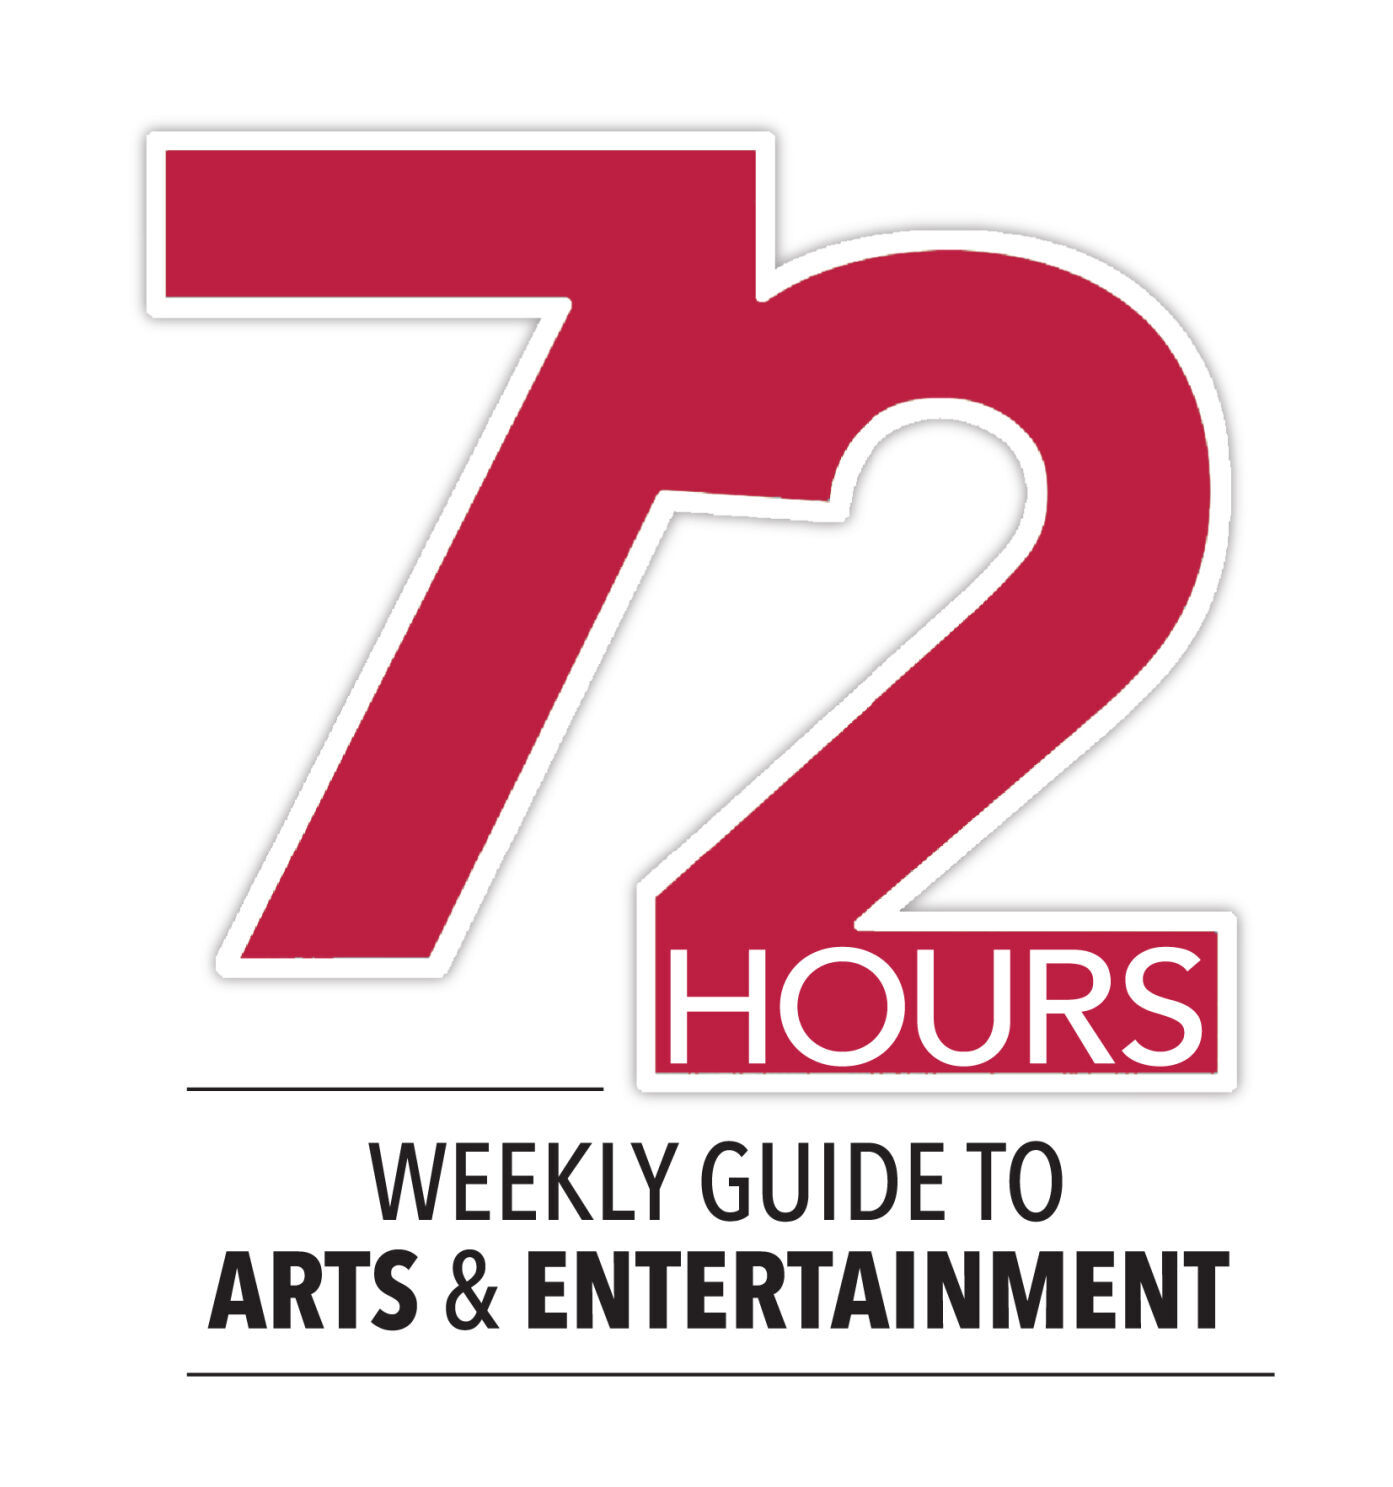 72 Hours is back — finally! | Arts & entertainment